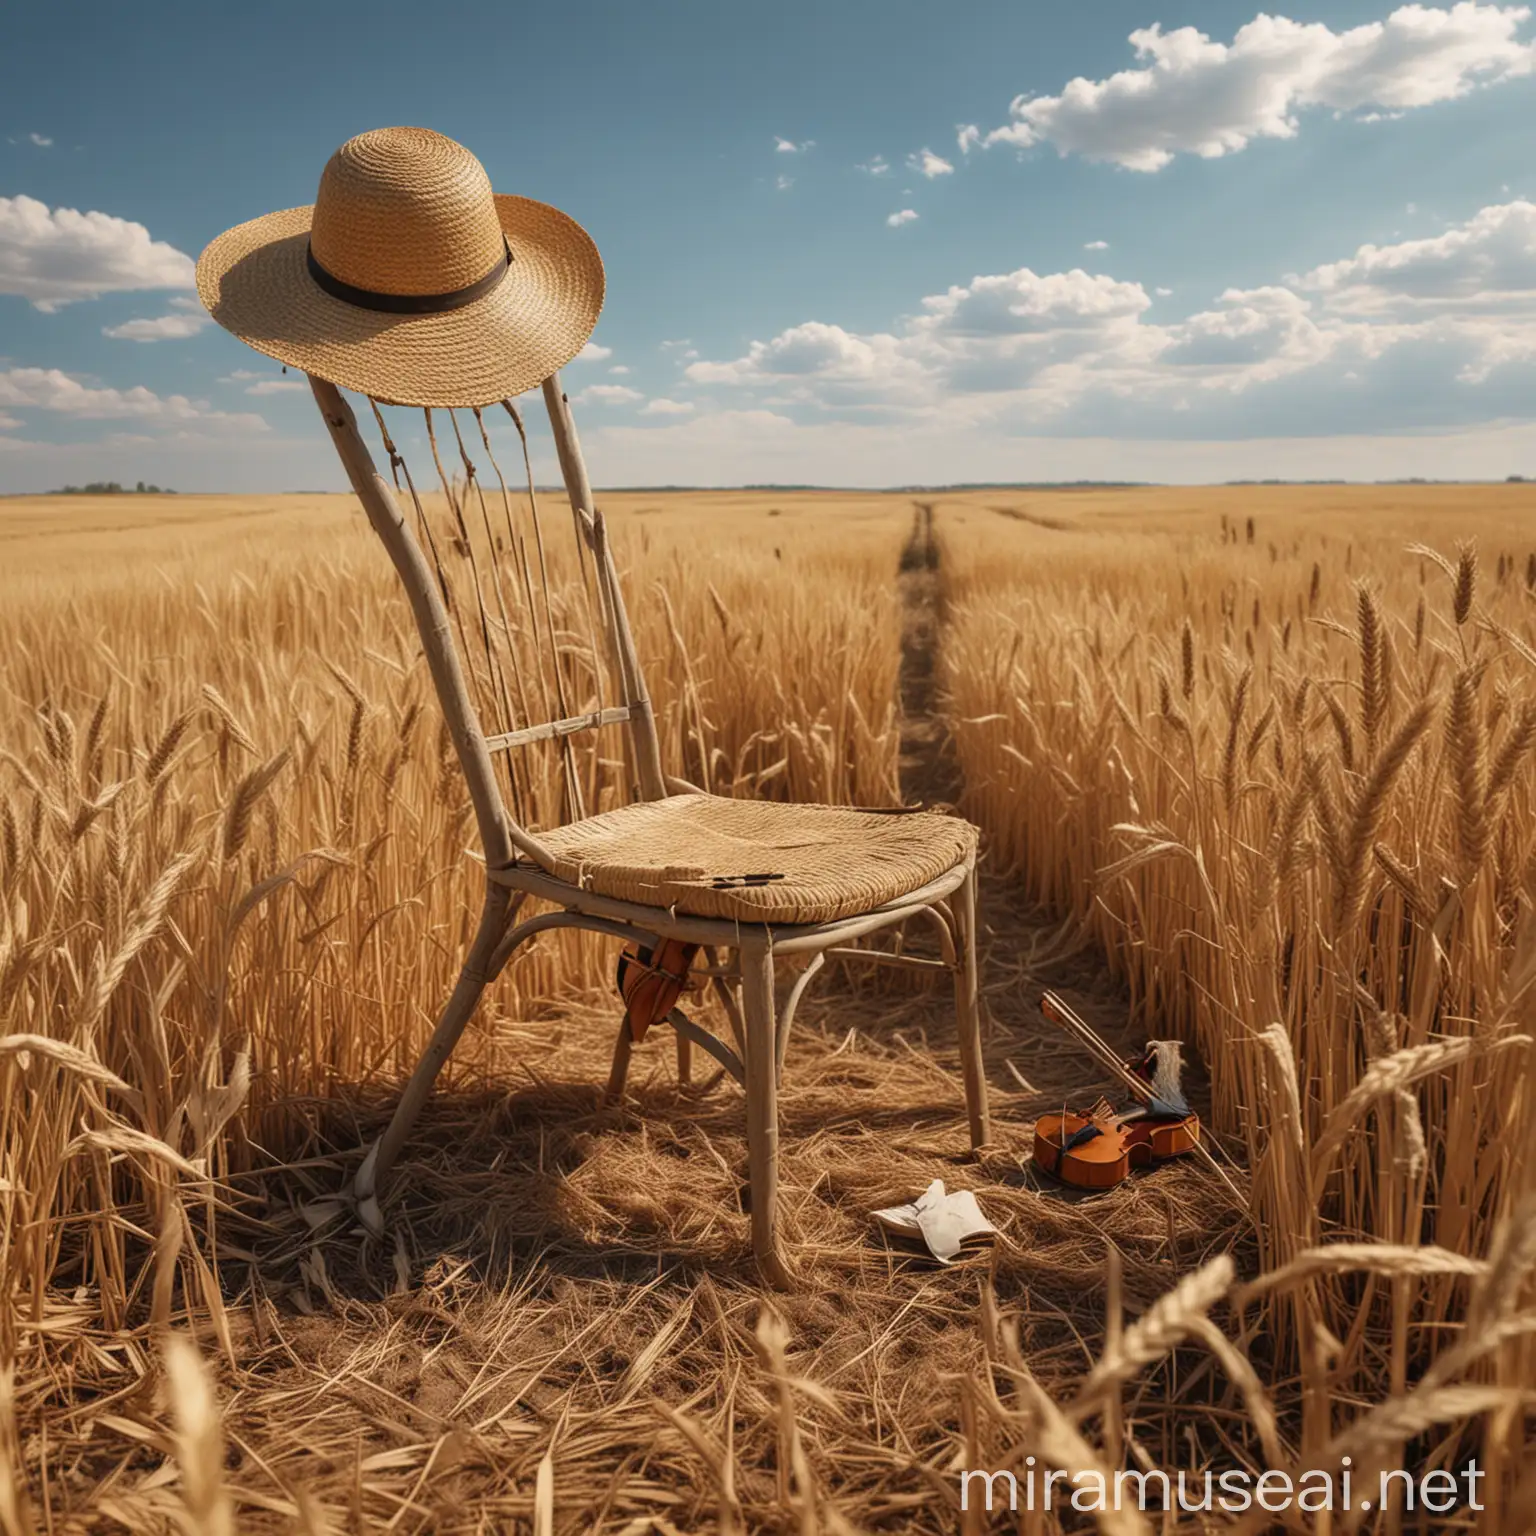 Abandoned Straw Chair and Broken Violin in Wheat Field